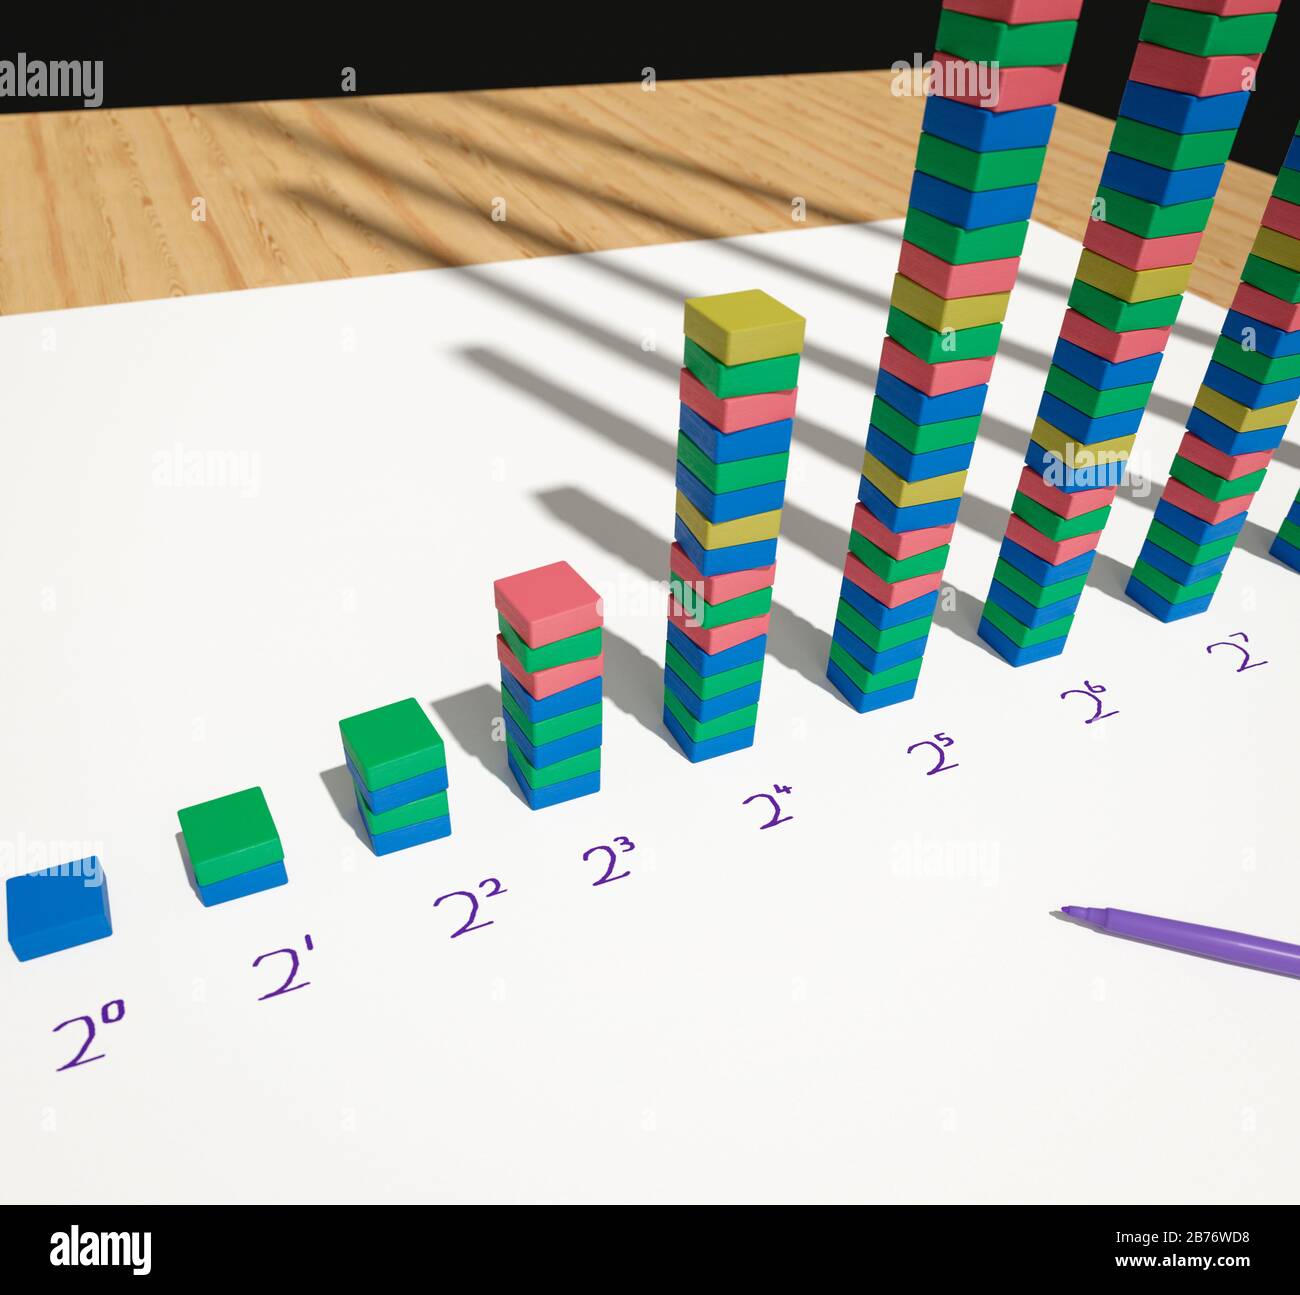 Increasing powers of two starting from zero, illustrated with columns of wooden blocks. Stock Photo